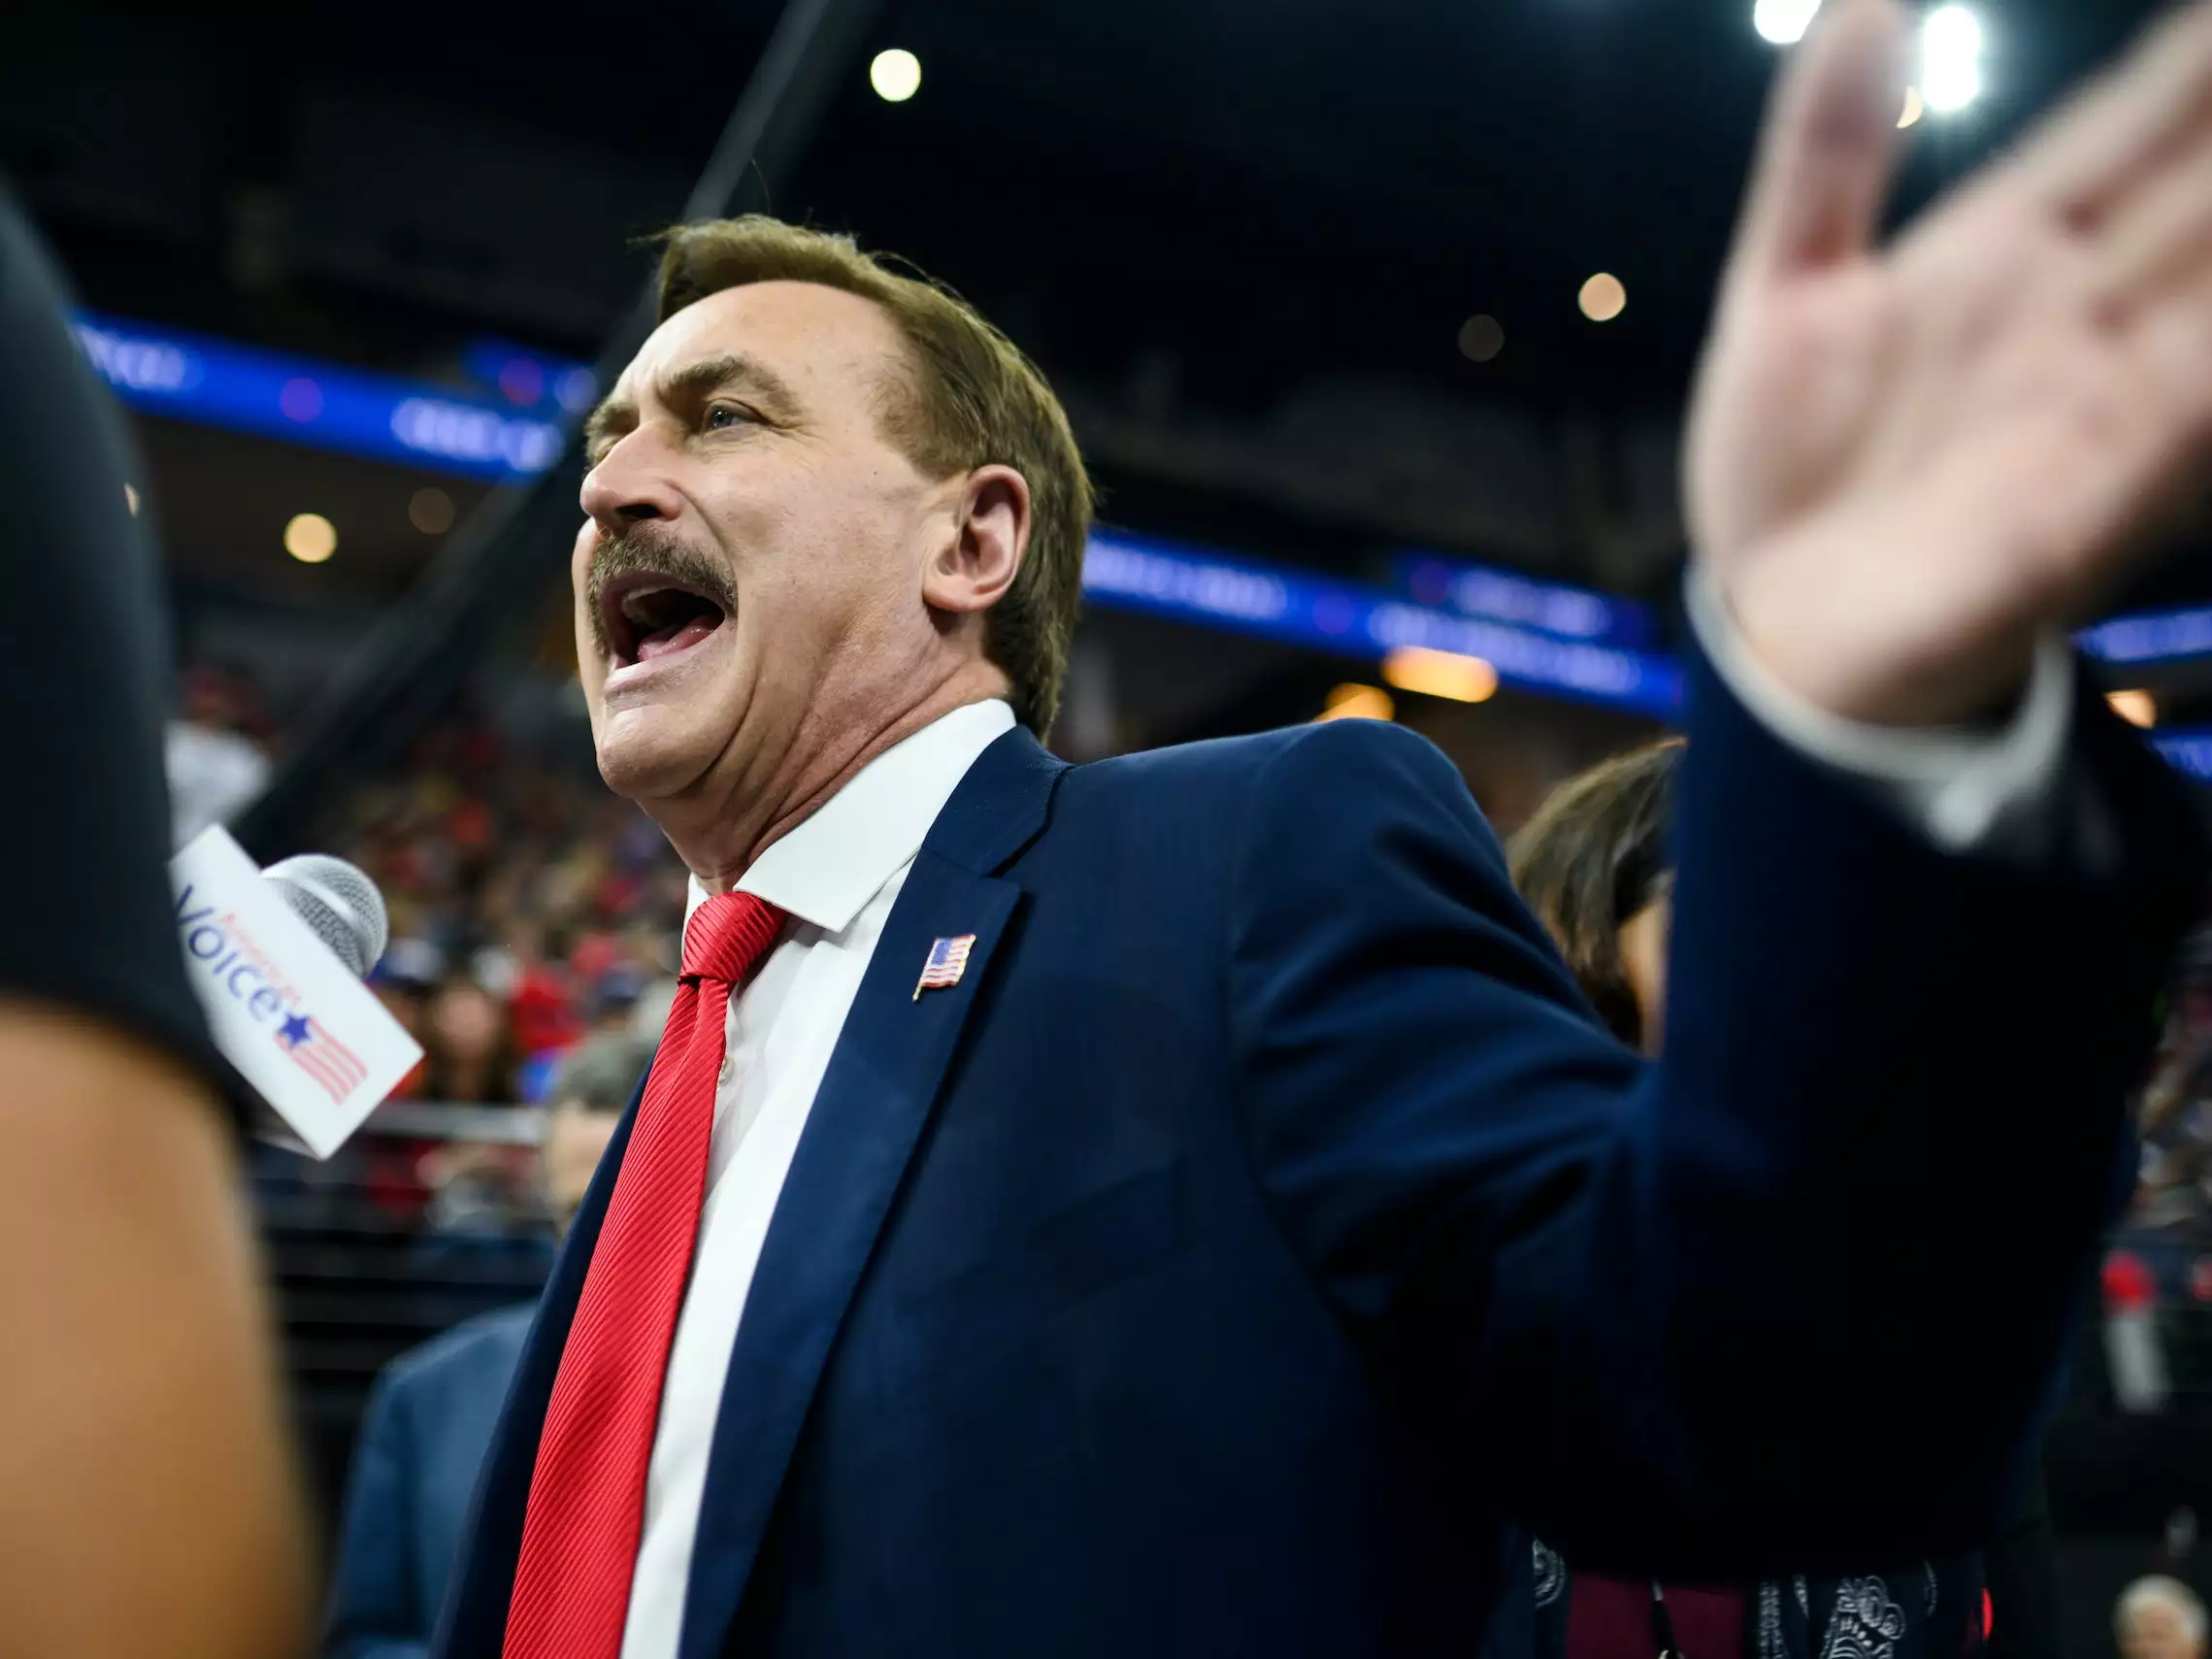 MyPillow CEO Mike Lindell is embroiled in political controversy, but he says the brand's famous late-night infomercials aren't going anywhere